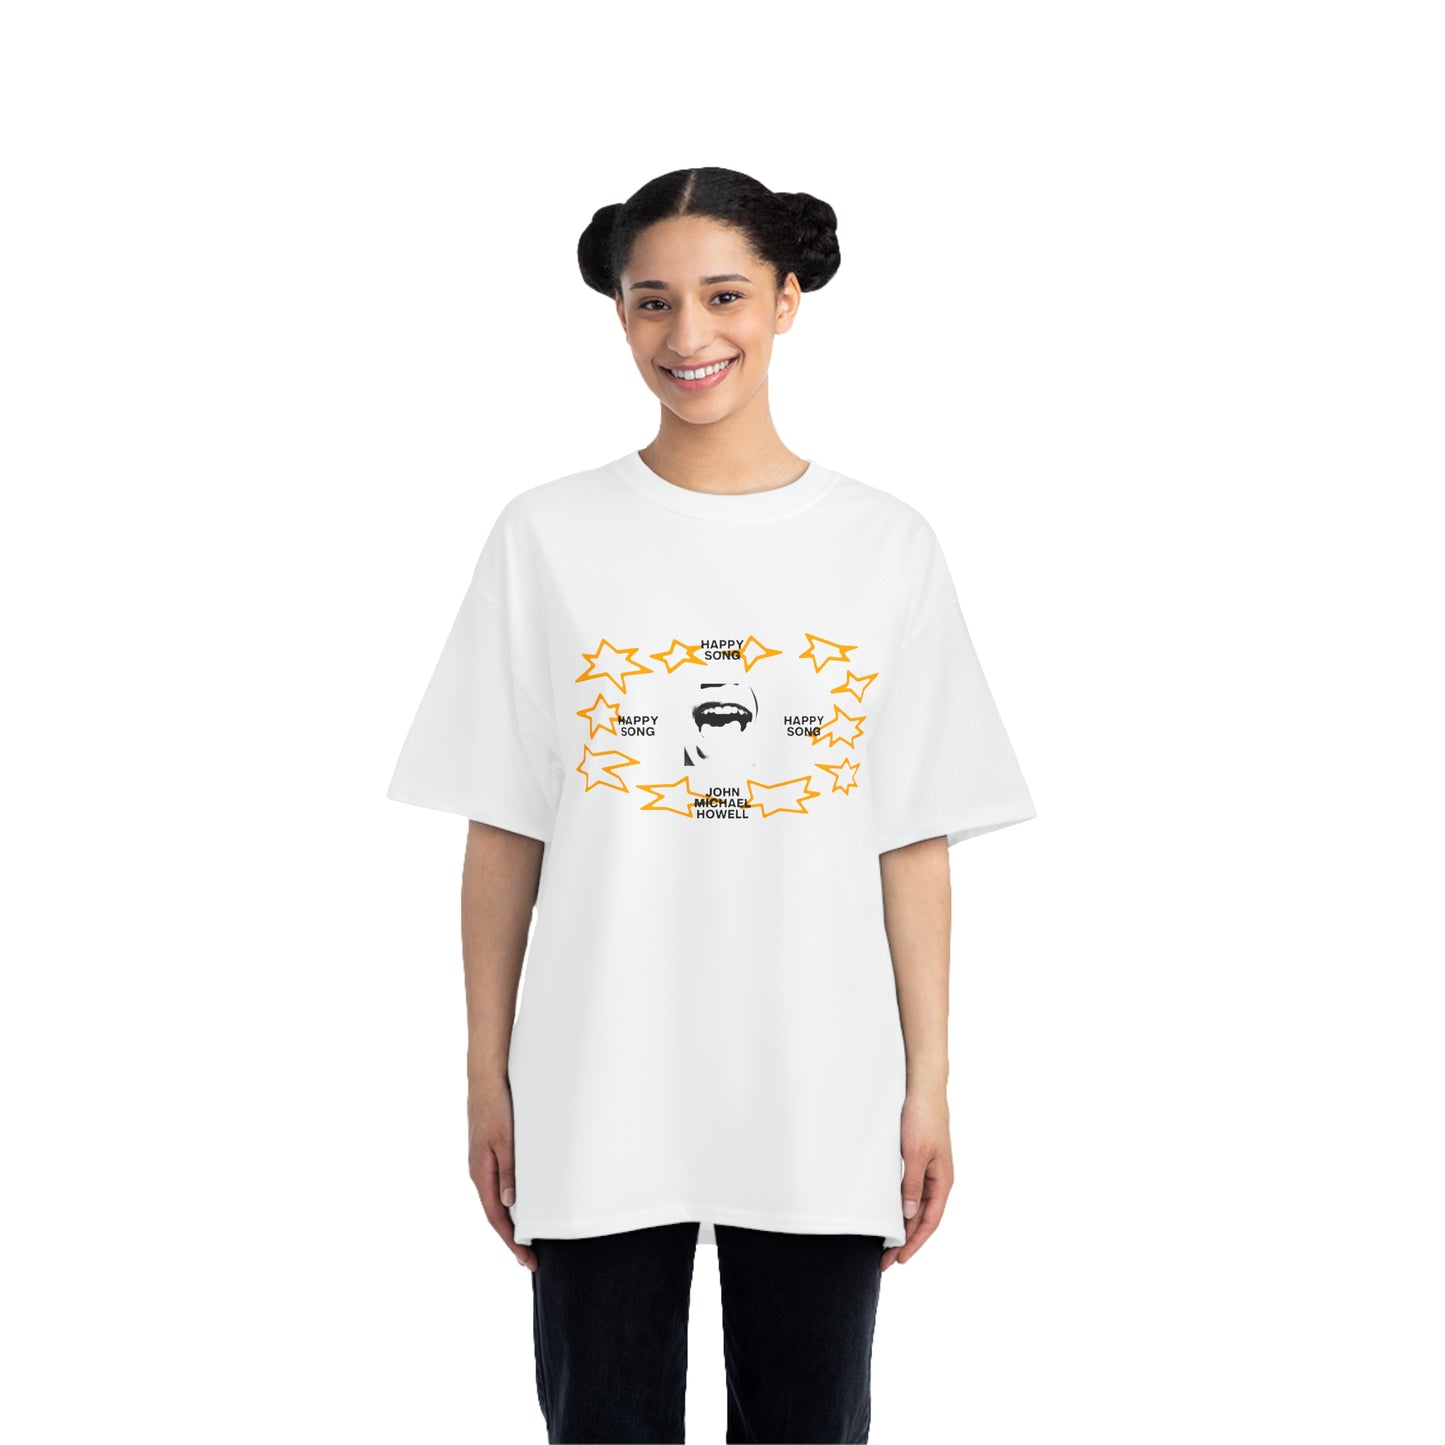 HAPPY SONG T-Shirt